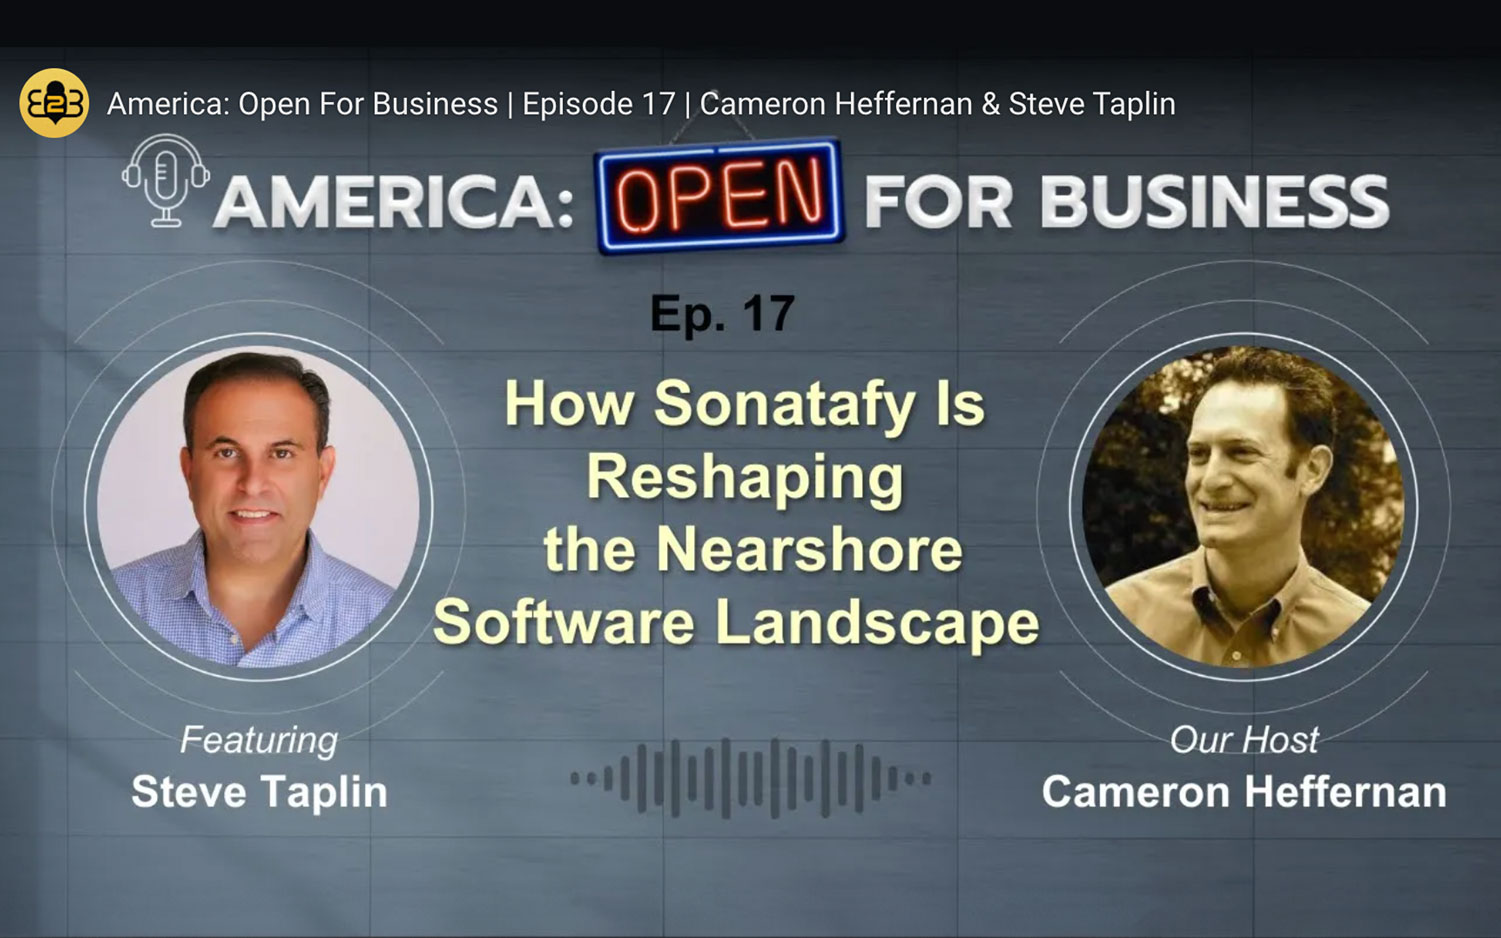 How Sonatafy Is Reshaping the Nearshore Software Landscape With Steve Taplin